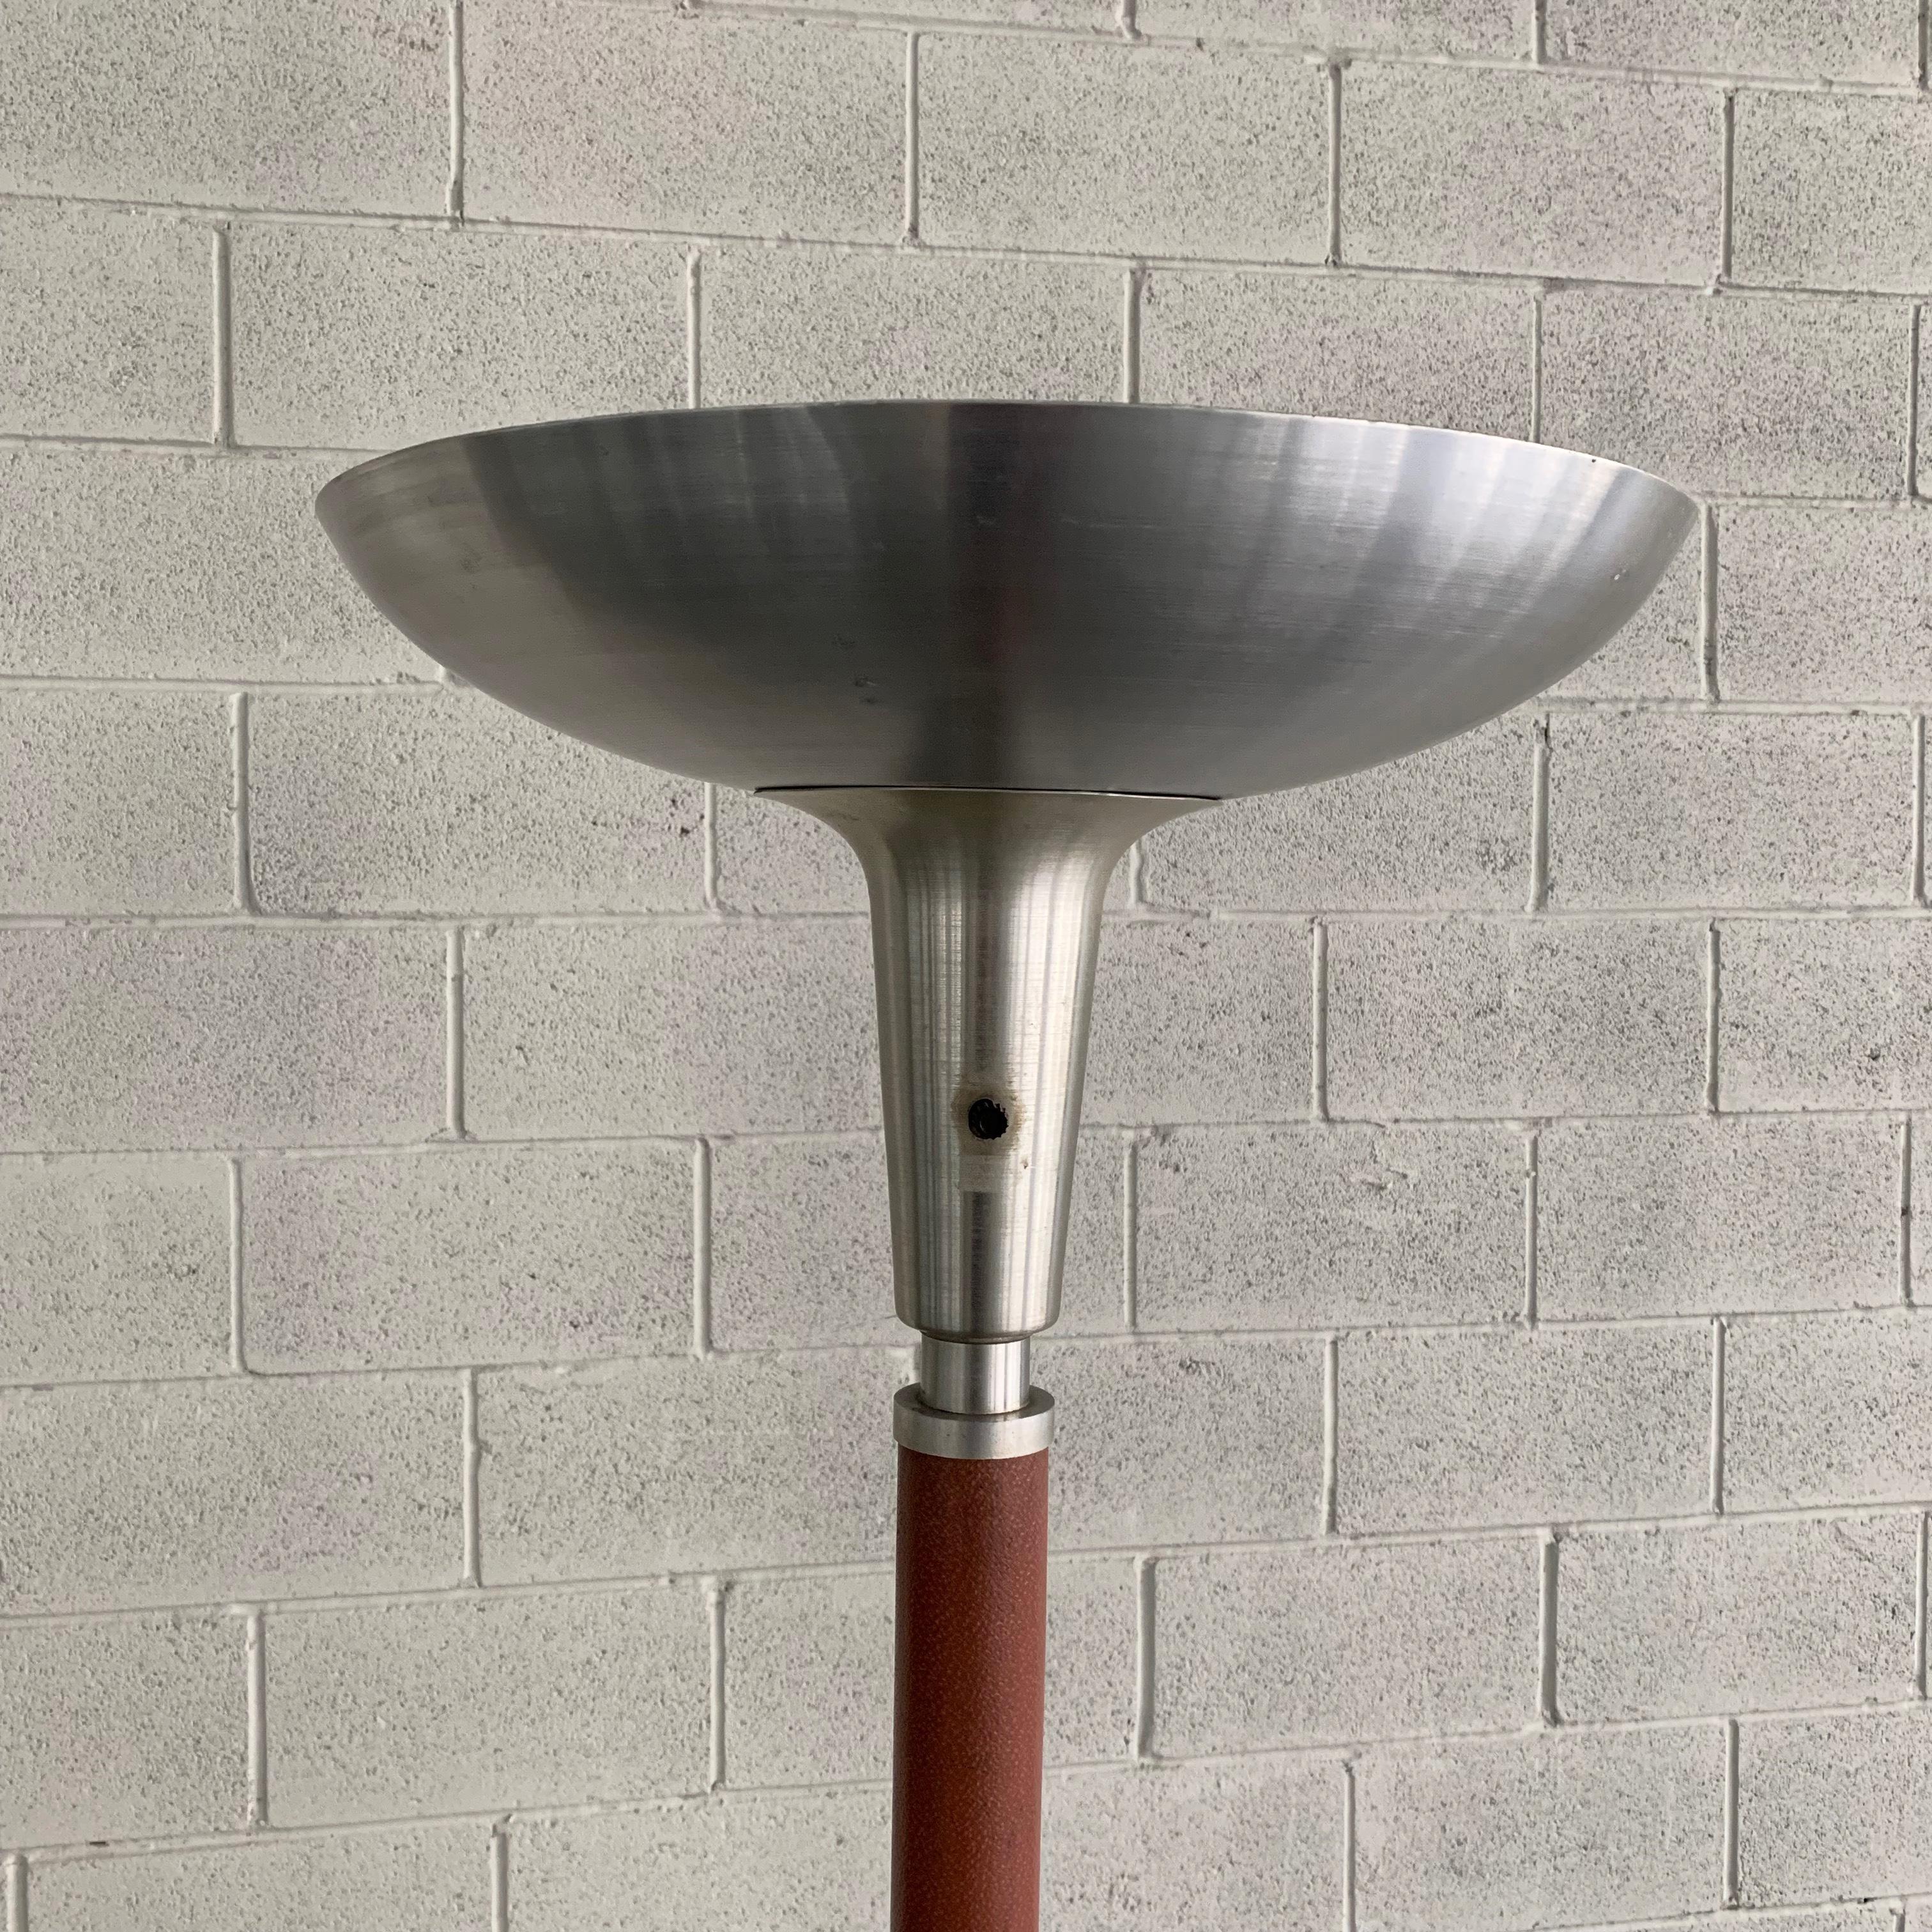 Midcentury, machine-age, torchiere floor lamp by Russel Wright is spun aluminum with a luggage tan leather clad stem. The lamp accepts a single, three-way. Mogul size bulb up to 300 watts. A medium socket adapter can be included to use a regular